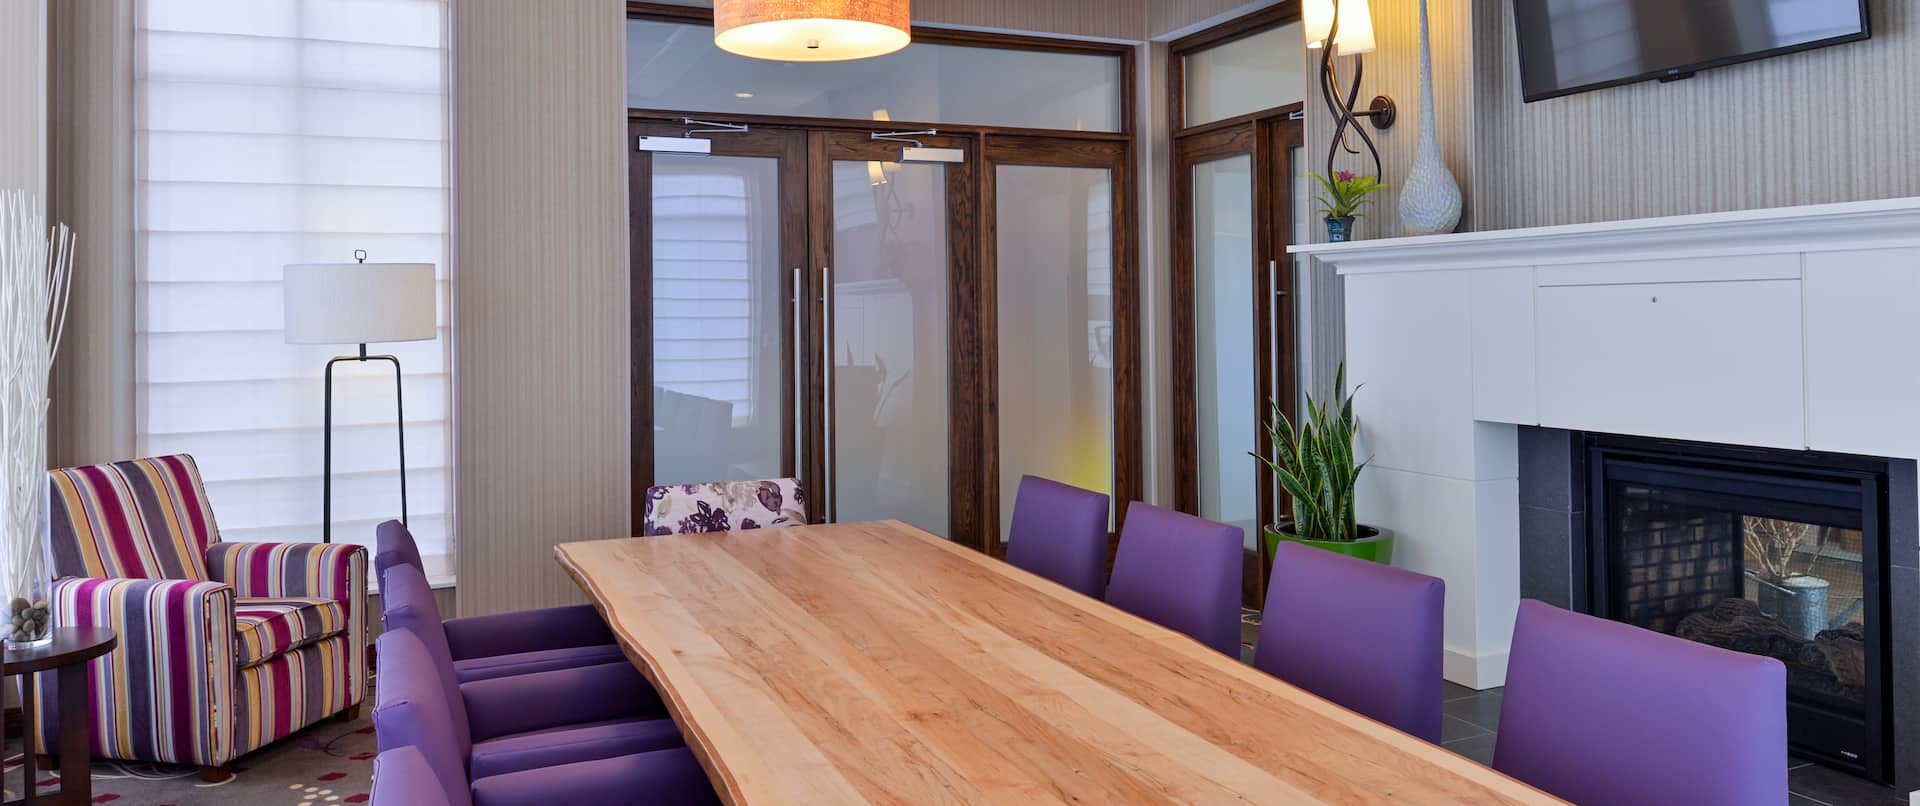 Conference Room in Boardroom Setup With TV, Fireplace, Long Table Surrounded by Purple Chairs, and Arm Chair in Corner by Windows 